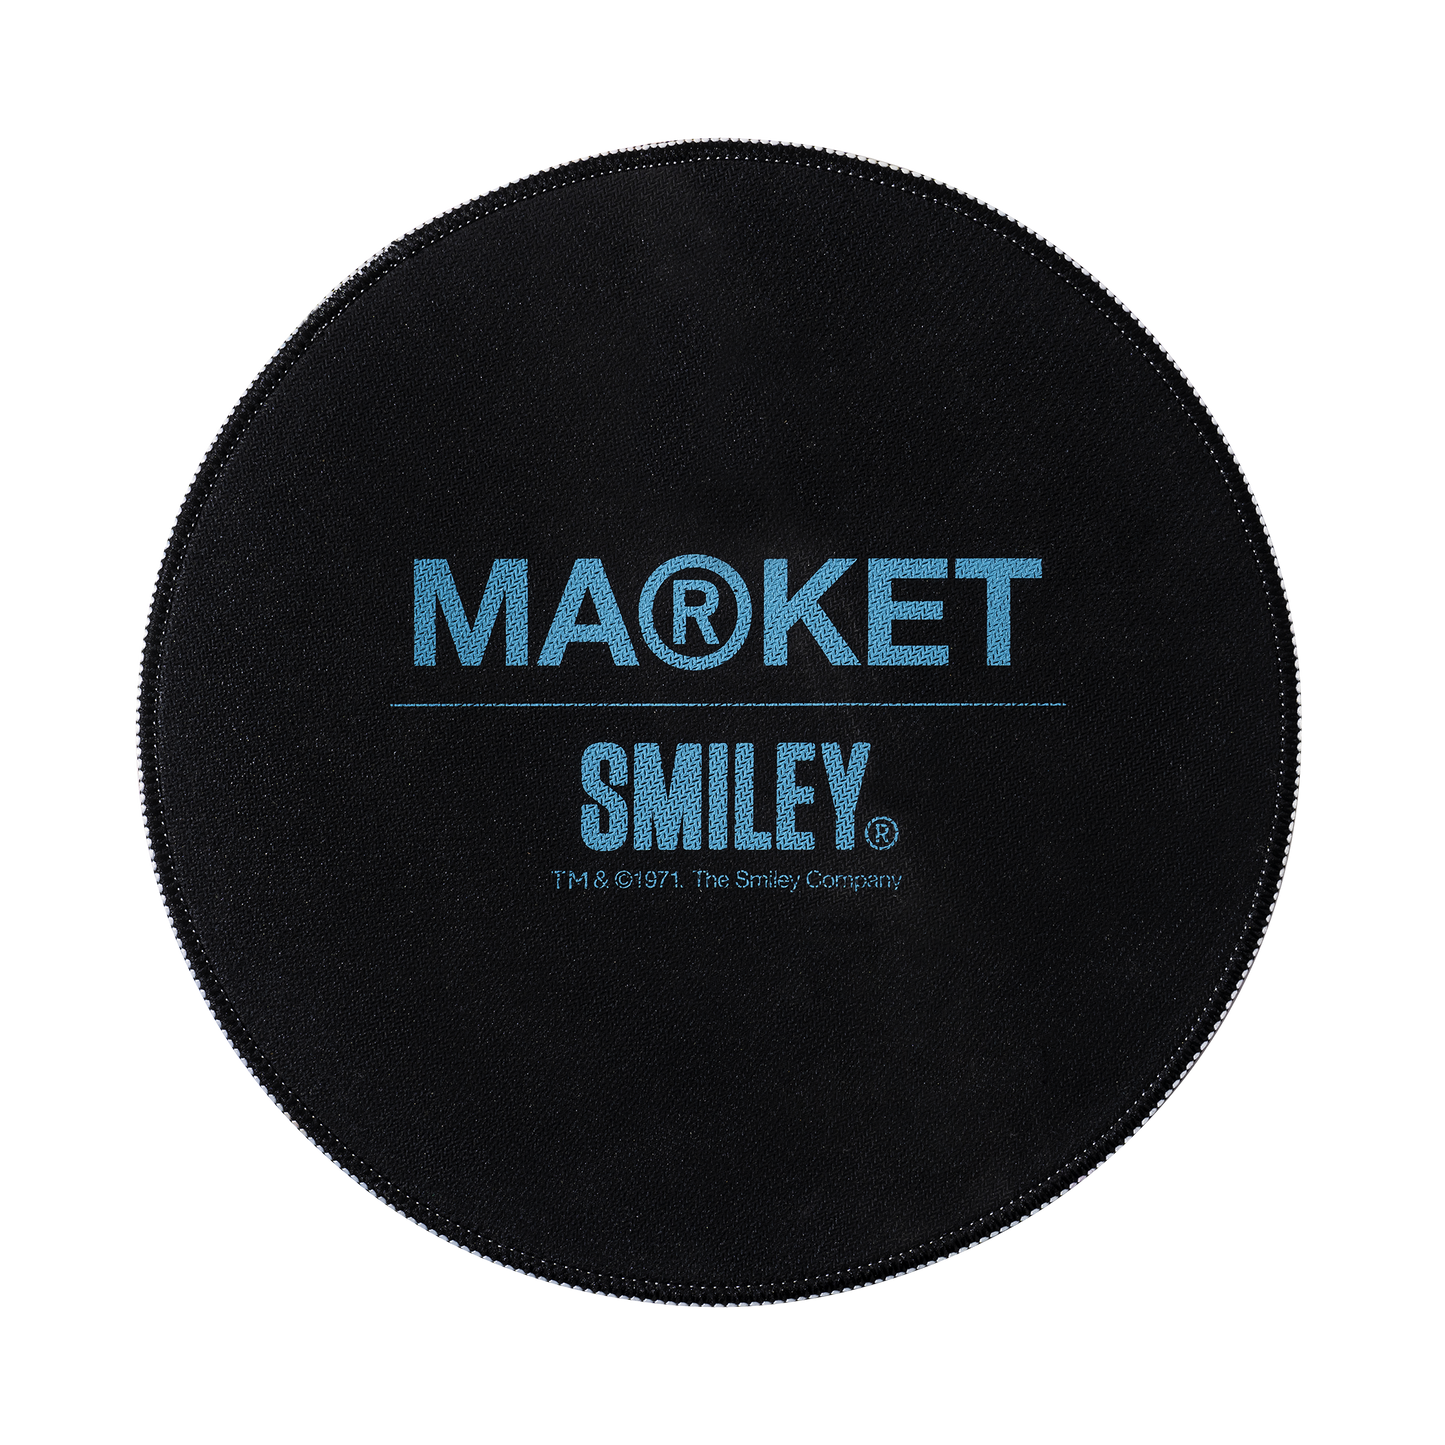 SMILEY NEAR SIGHTED MOUSE PAD